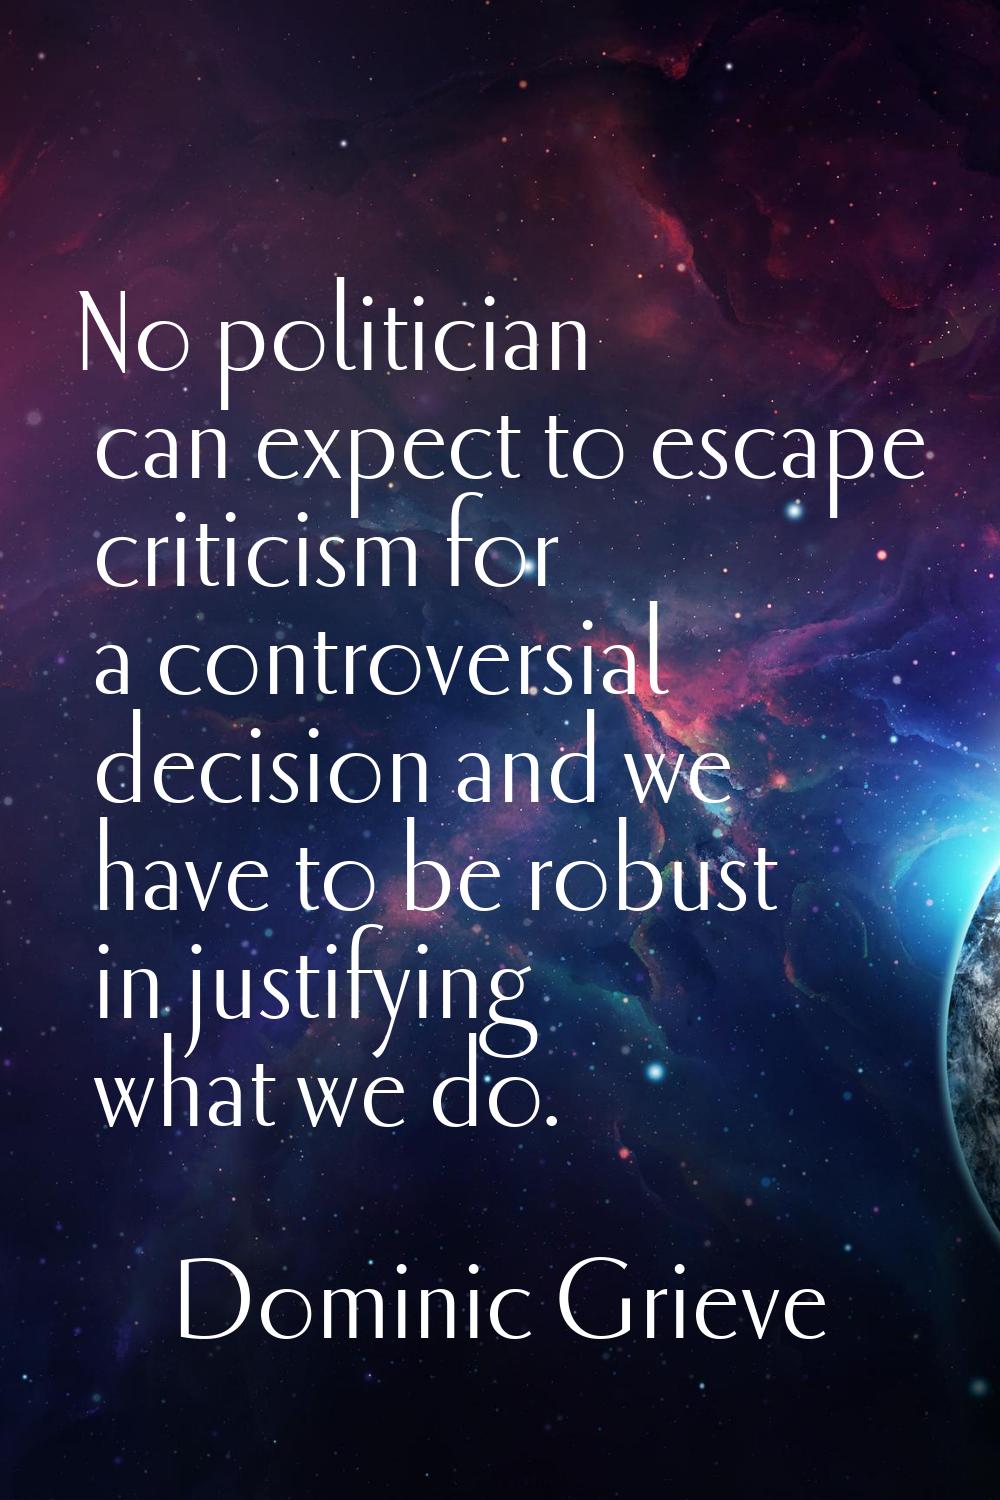 No politician can expect to escape criticism for a controversial decision and we have to be robust 